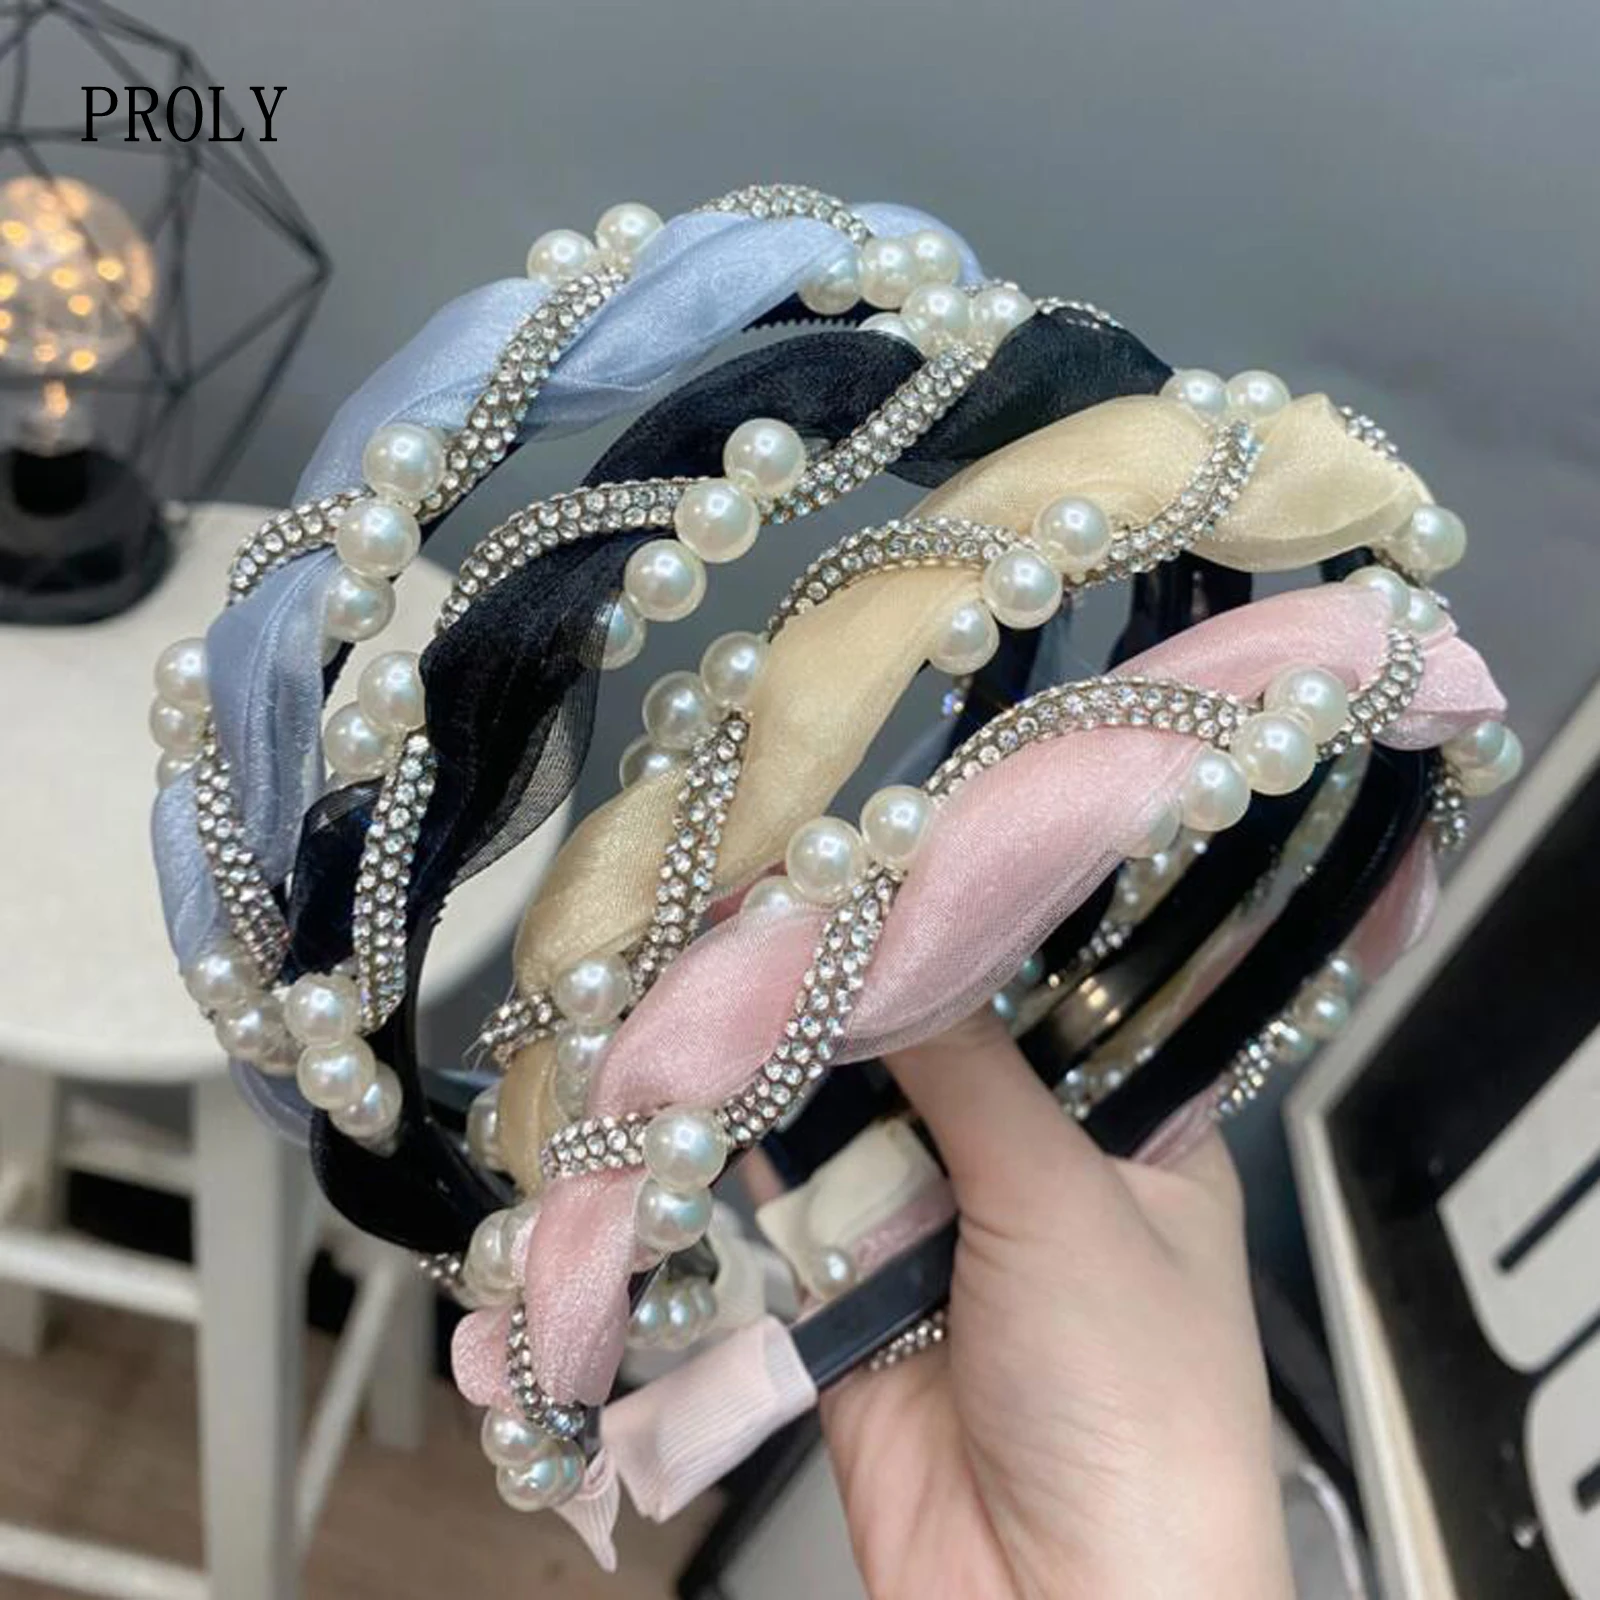 

PROLY New Fashion Spring Hair Accessories Fresh Light Color Headband Tangled Pearls Rhinestone Hairband Wholesale